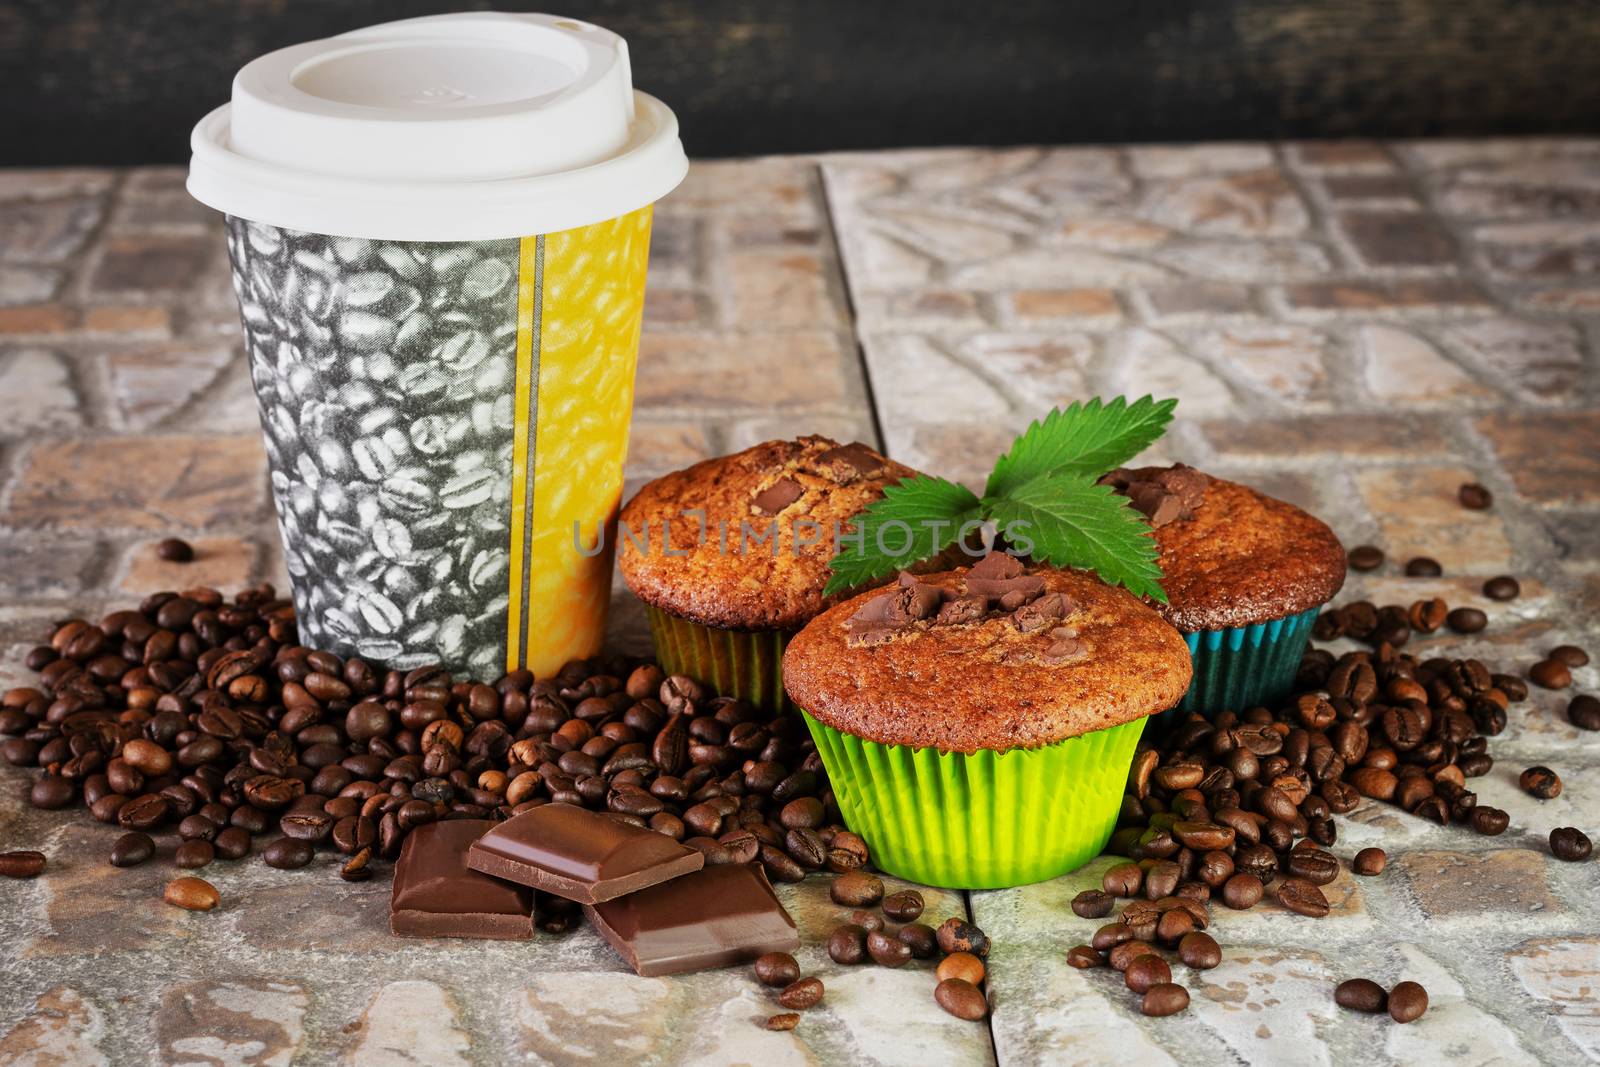 Muffins and coffee to go with green sprig, pieces of chocolate and coffee beans on stoneware background.